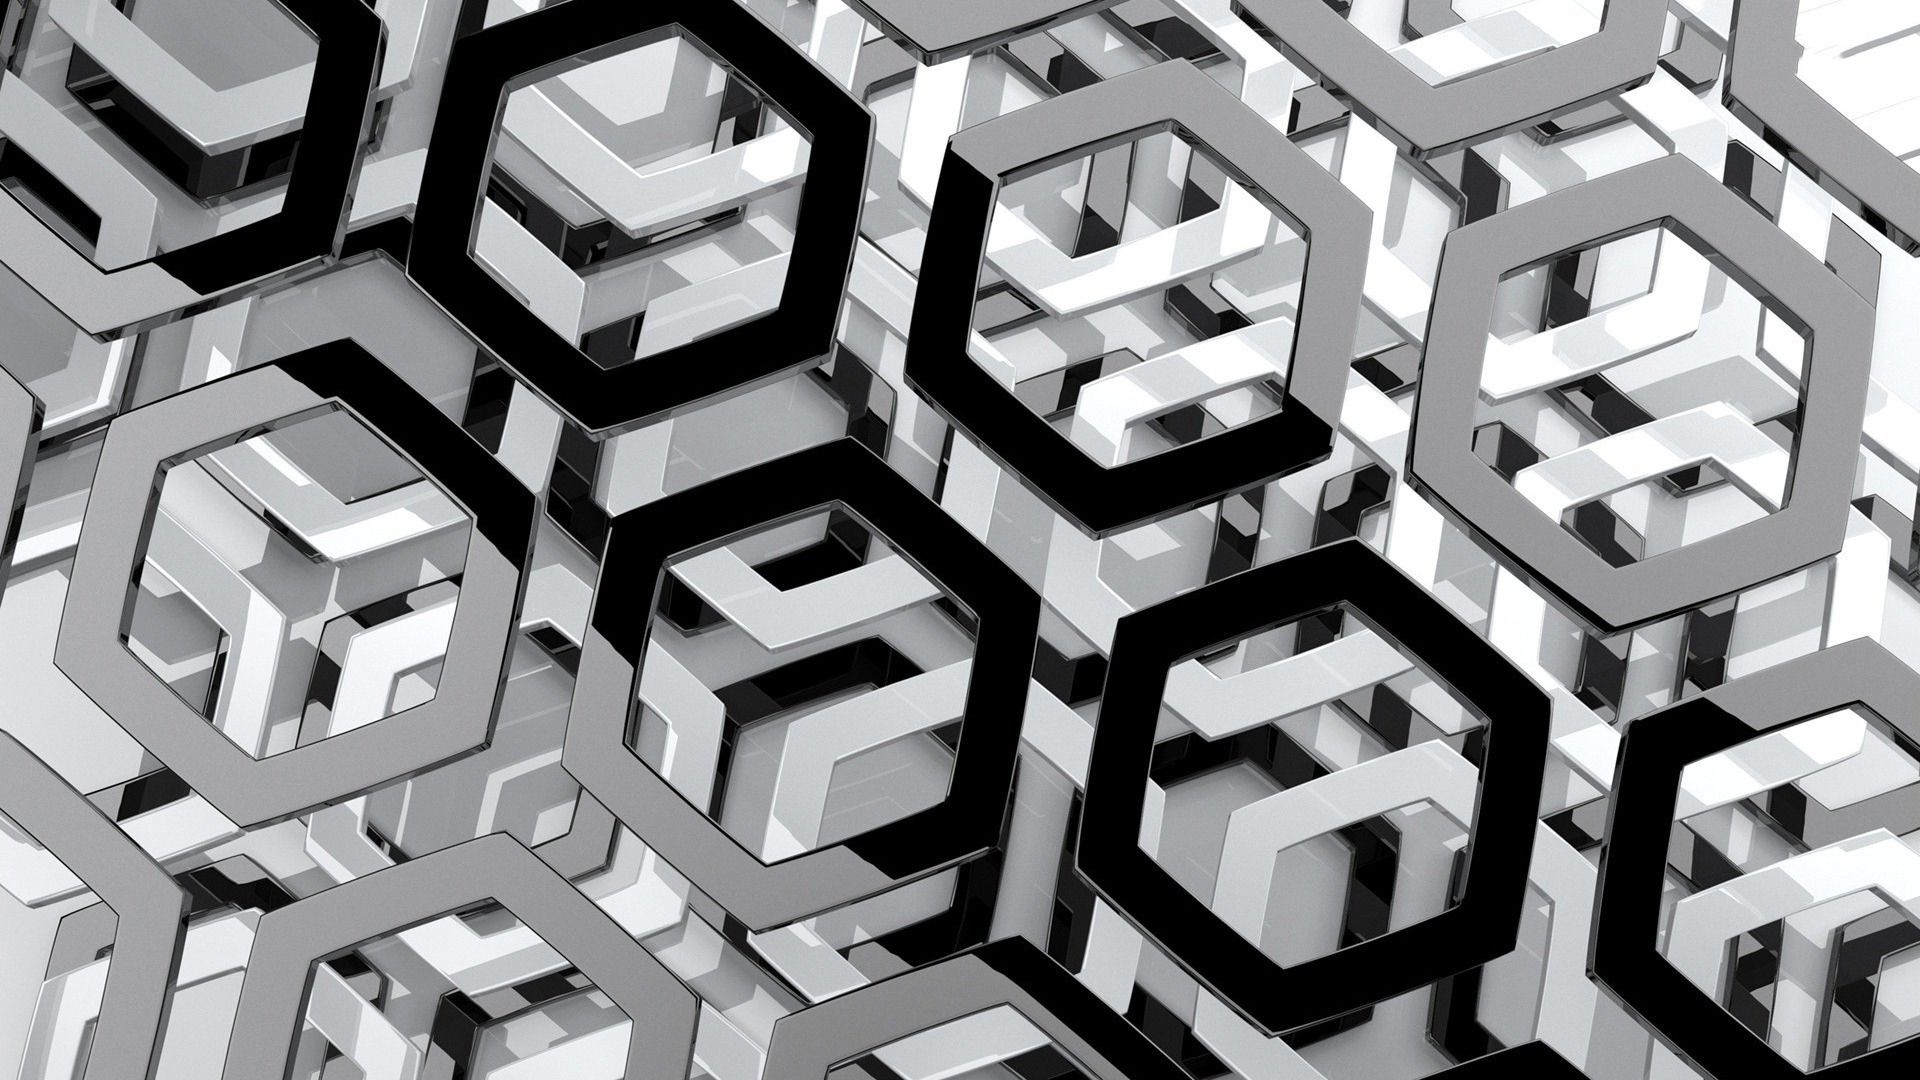 Metal Pattern Made up of Overlapping Hexagons